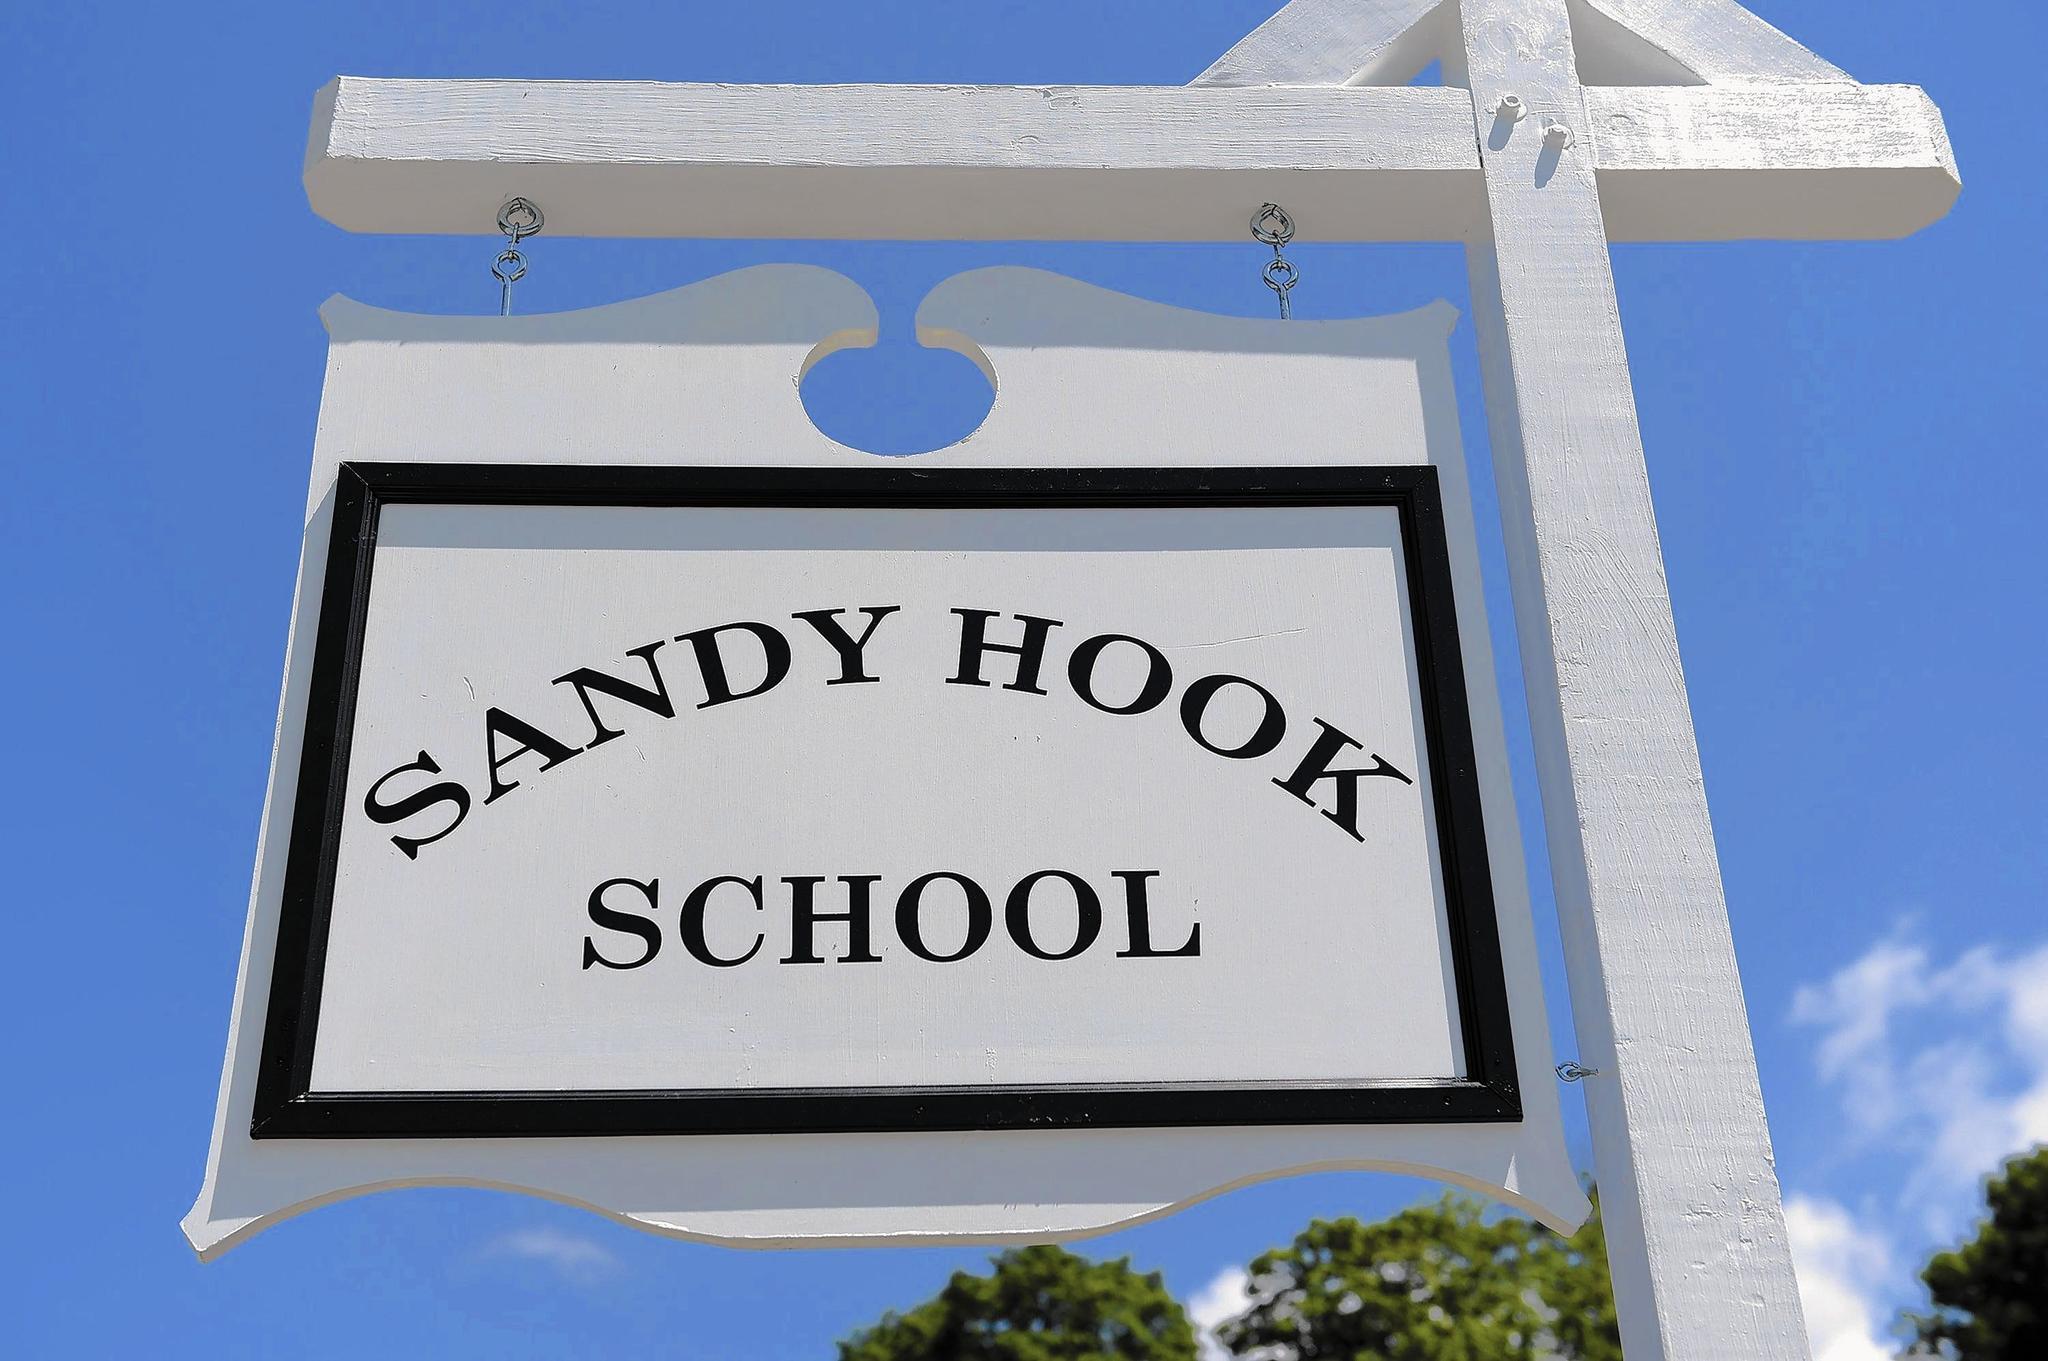 Sandy Hook Memorial Site Selection Slowed By Sounds Of Gunshots - Hartford Courant2048 x 1361